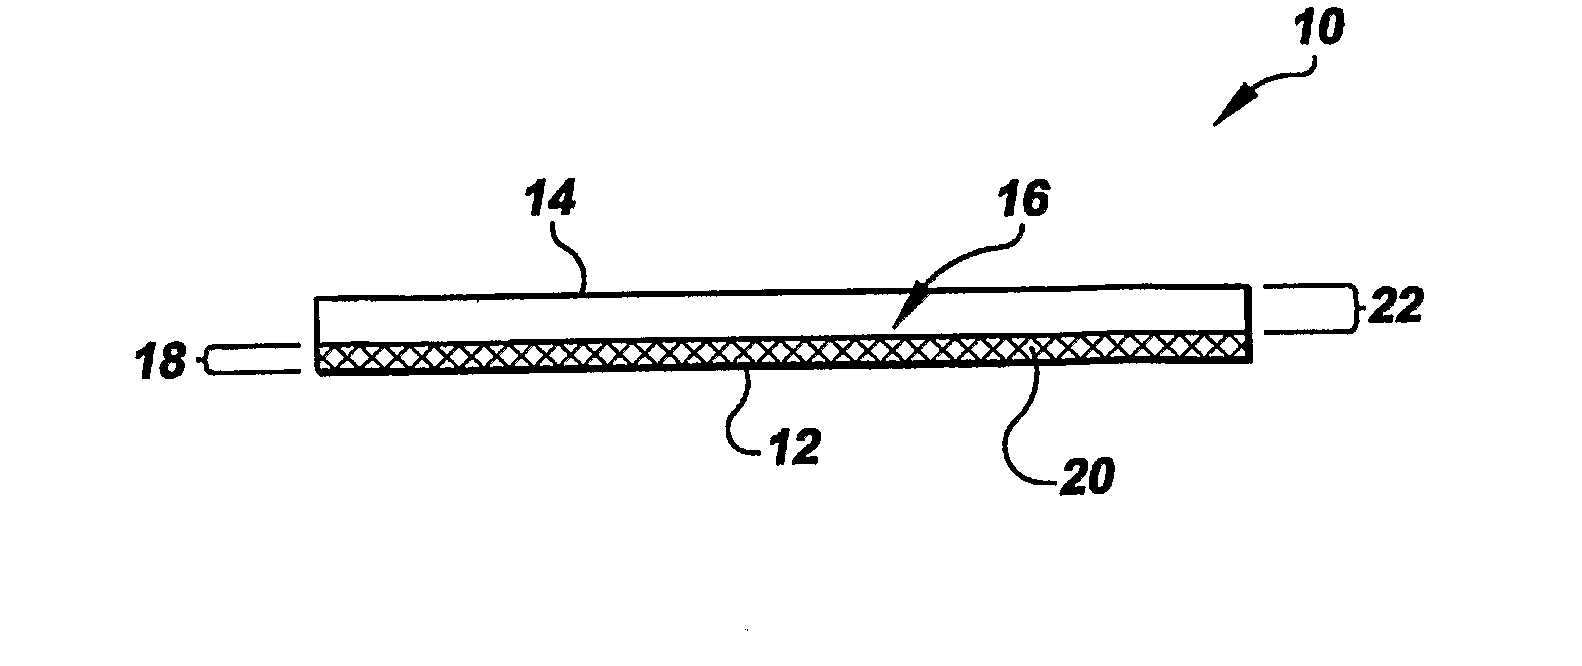 Composite Water Management Electrolyte Membrane For A Fuel Cell